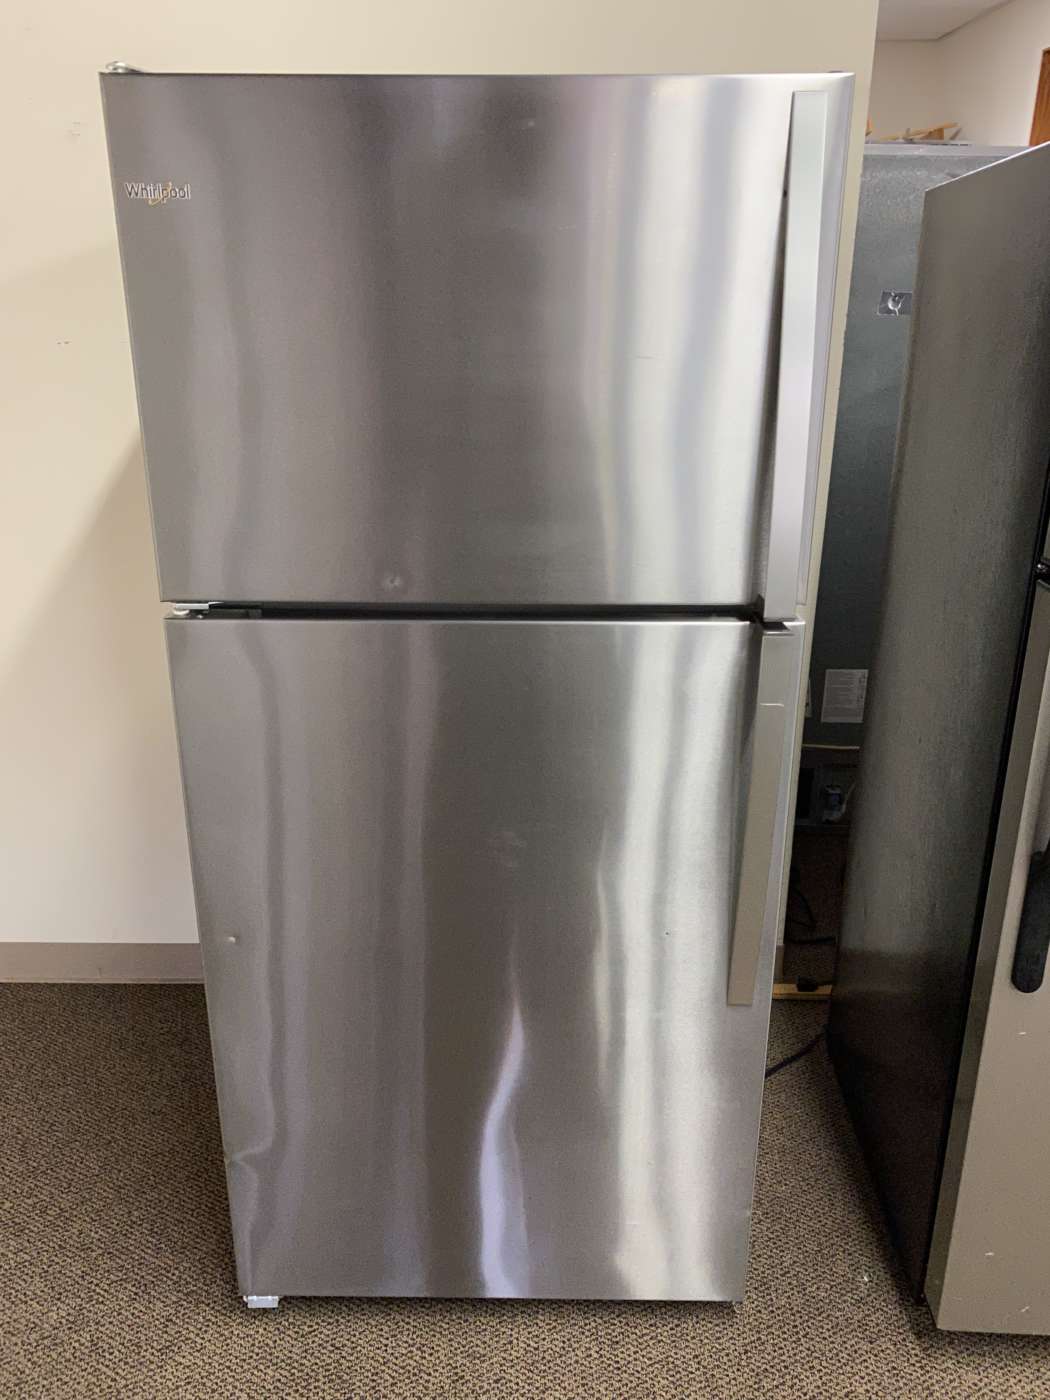 Reconditioned WHIRLPOOL 18 Cu. Ft. Top-Freezer Refrigerator – Stainless